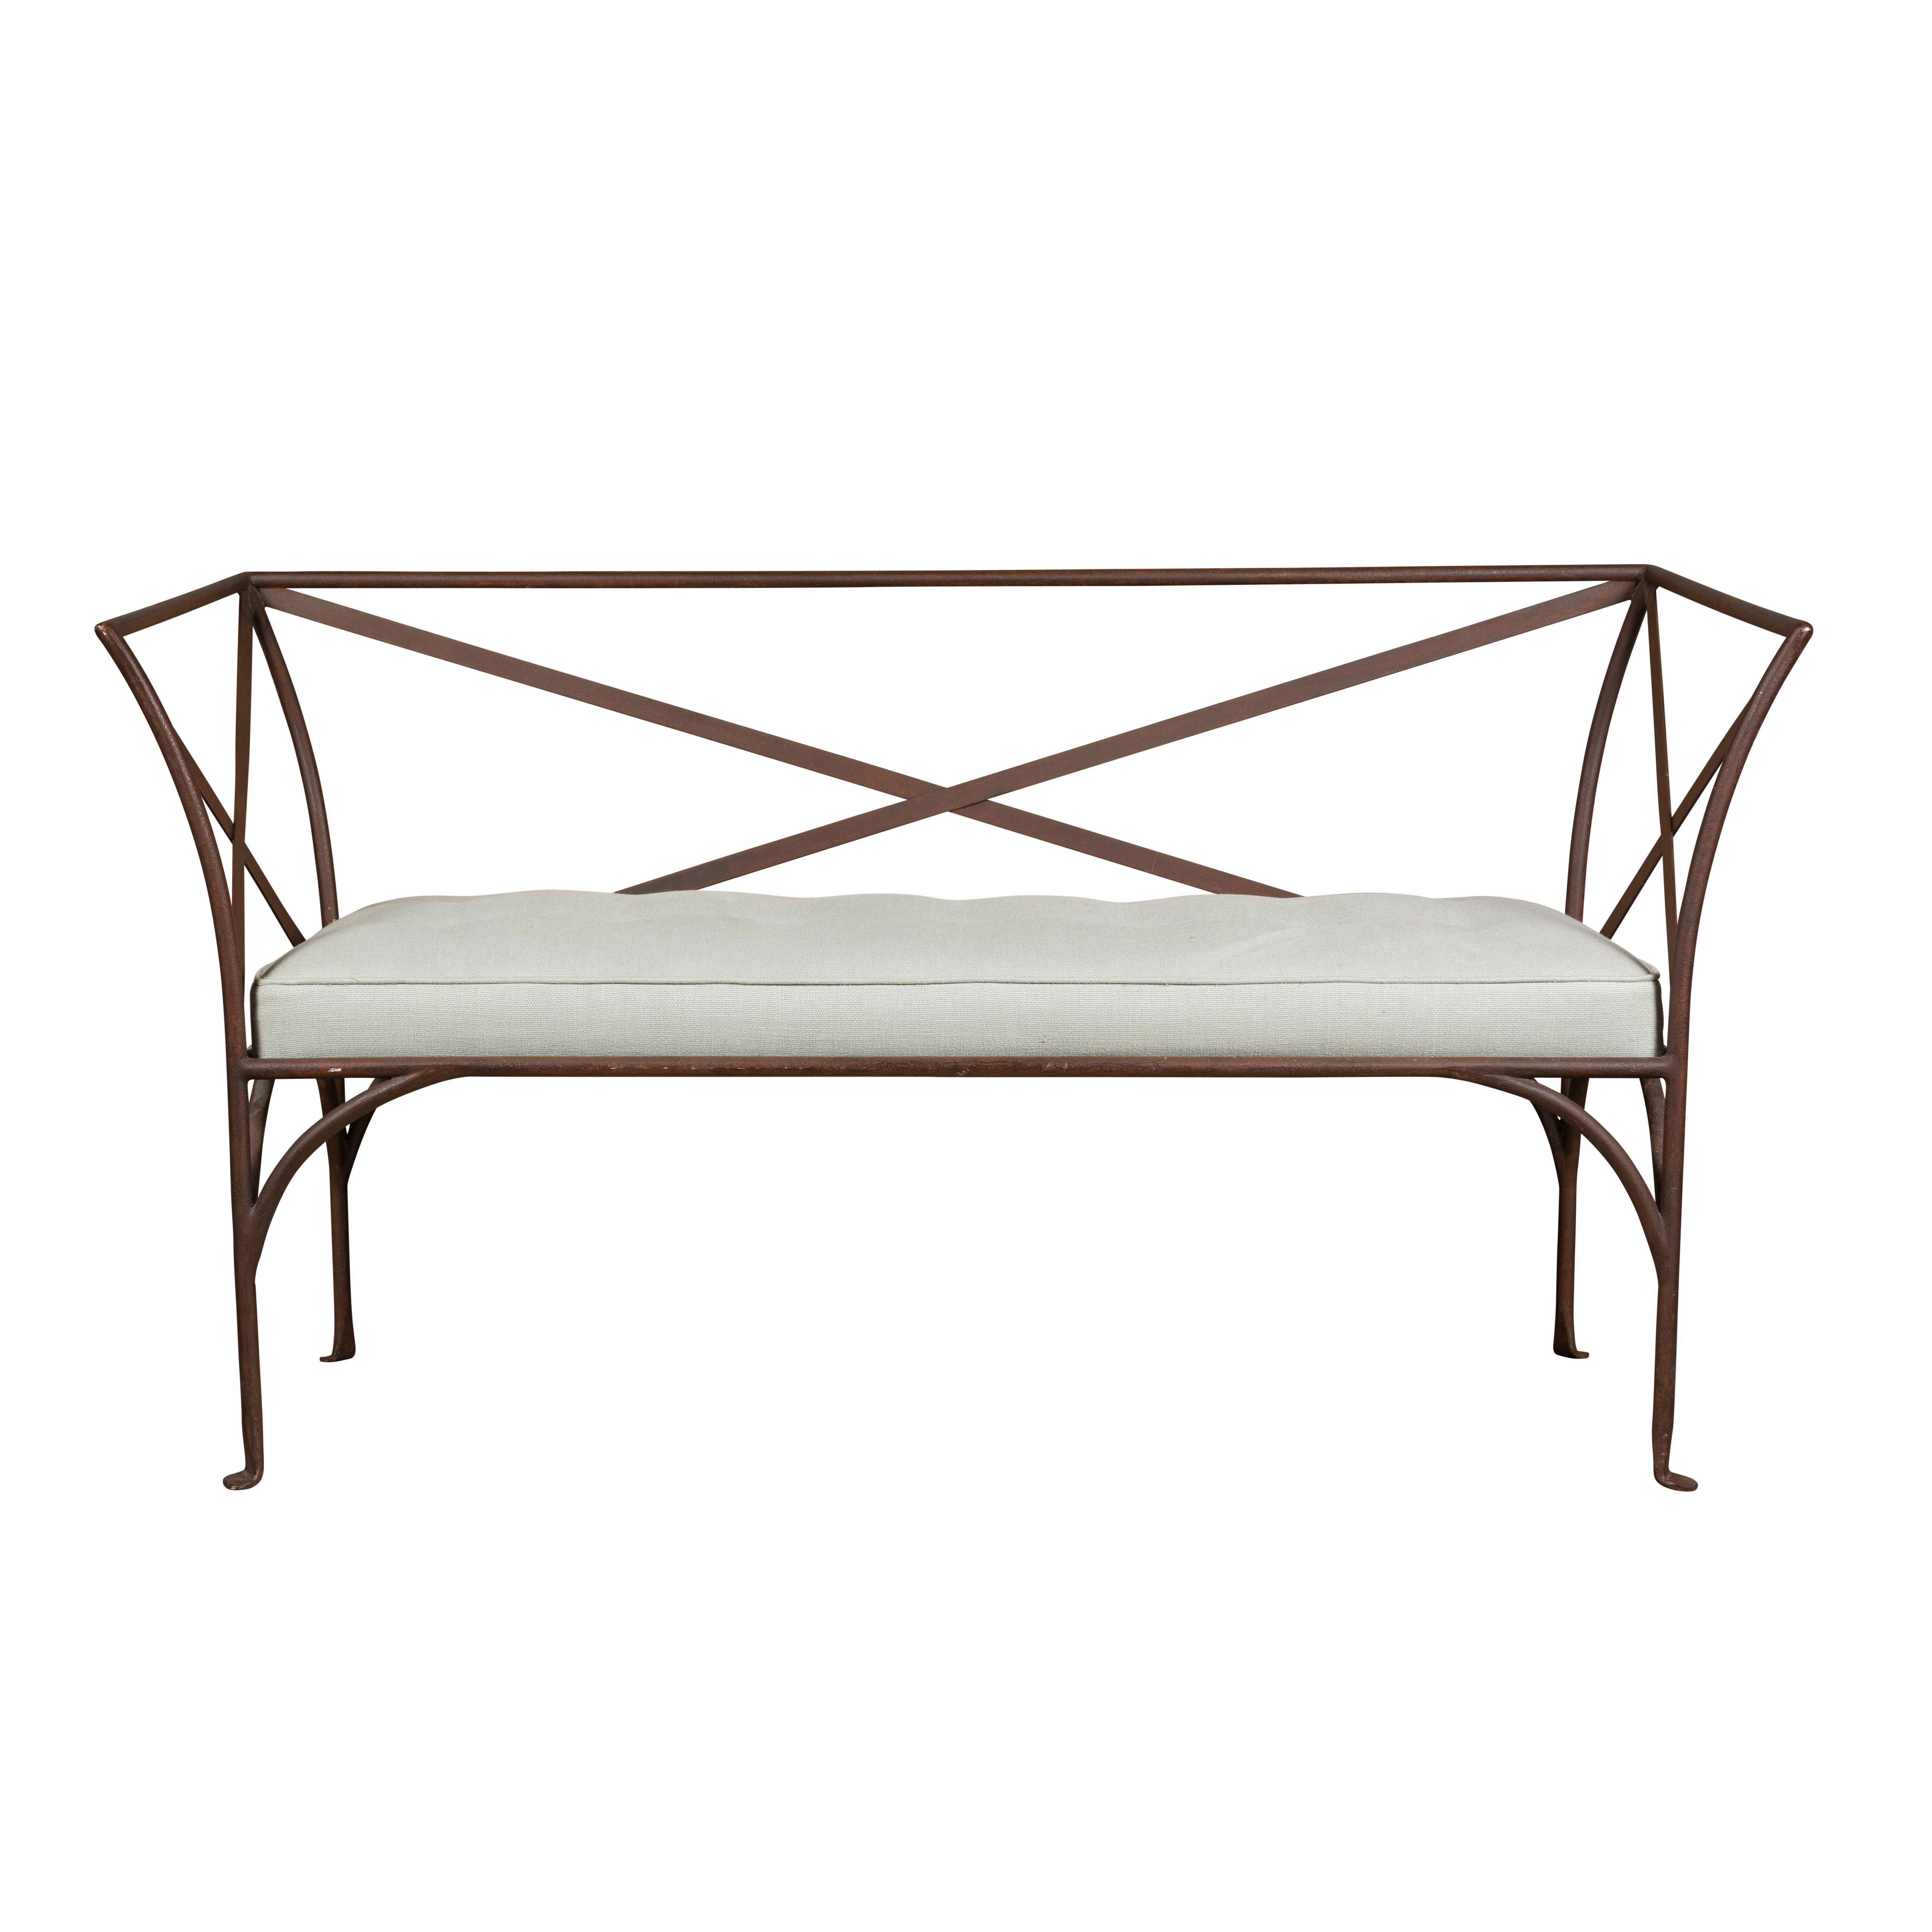 An English iron bench from the mid 20th century with out-scrolling side supports, pad feet and custom cushion. This mid-20th century English iron bench stands as a testament to both timeless design and enduring craftsmanship. Its elegant silhouette